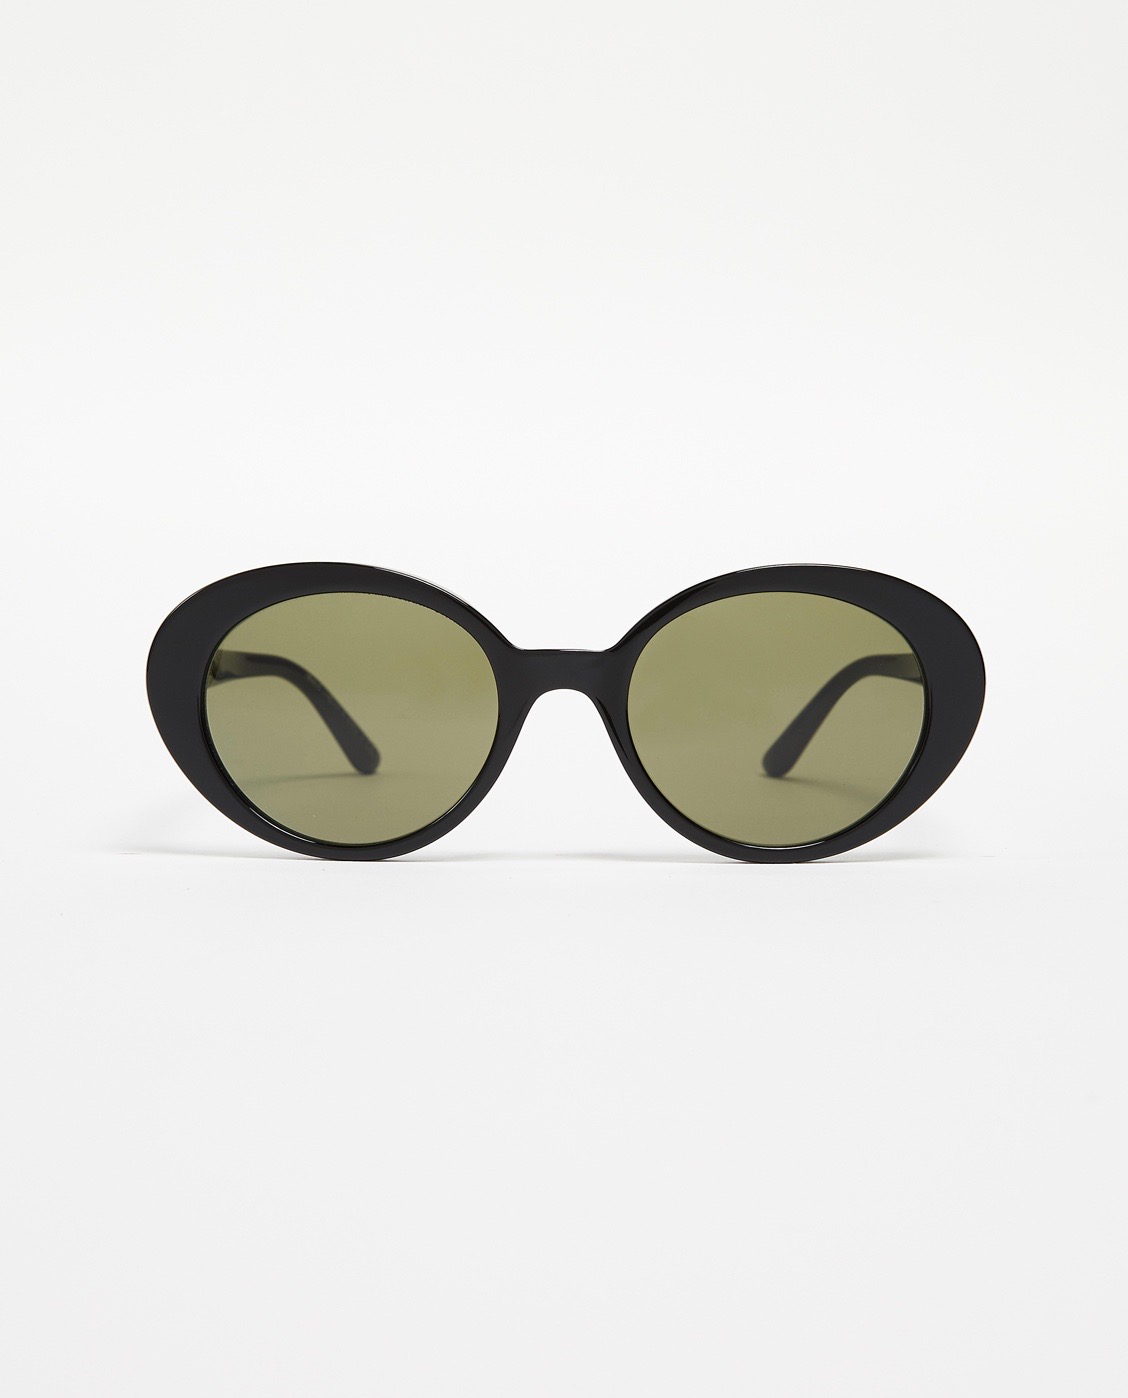 Oliver Peoples The Row Parquet Sunglasses Black Jackie O.